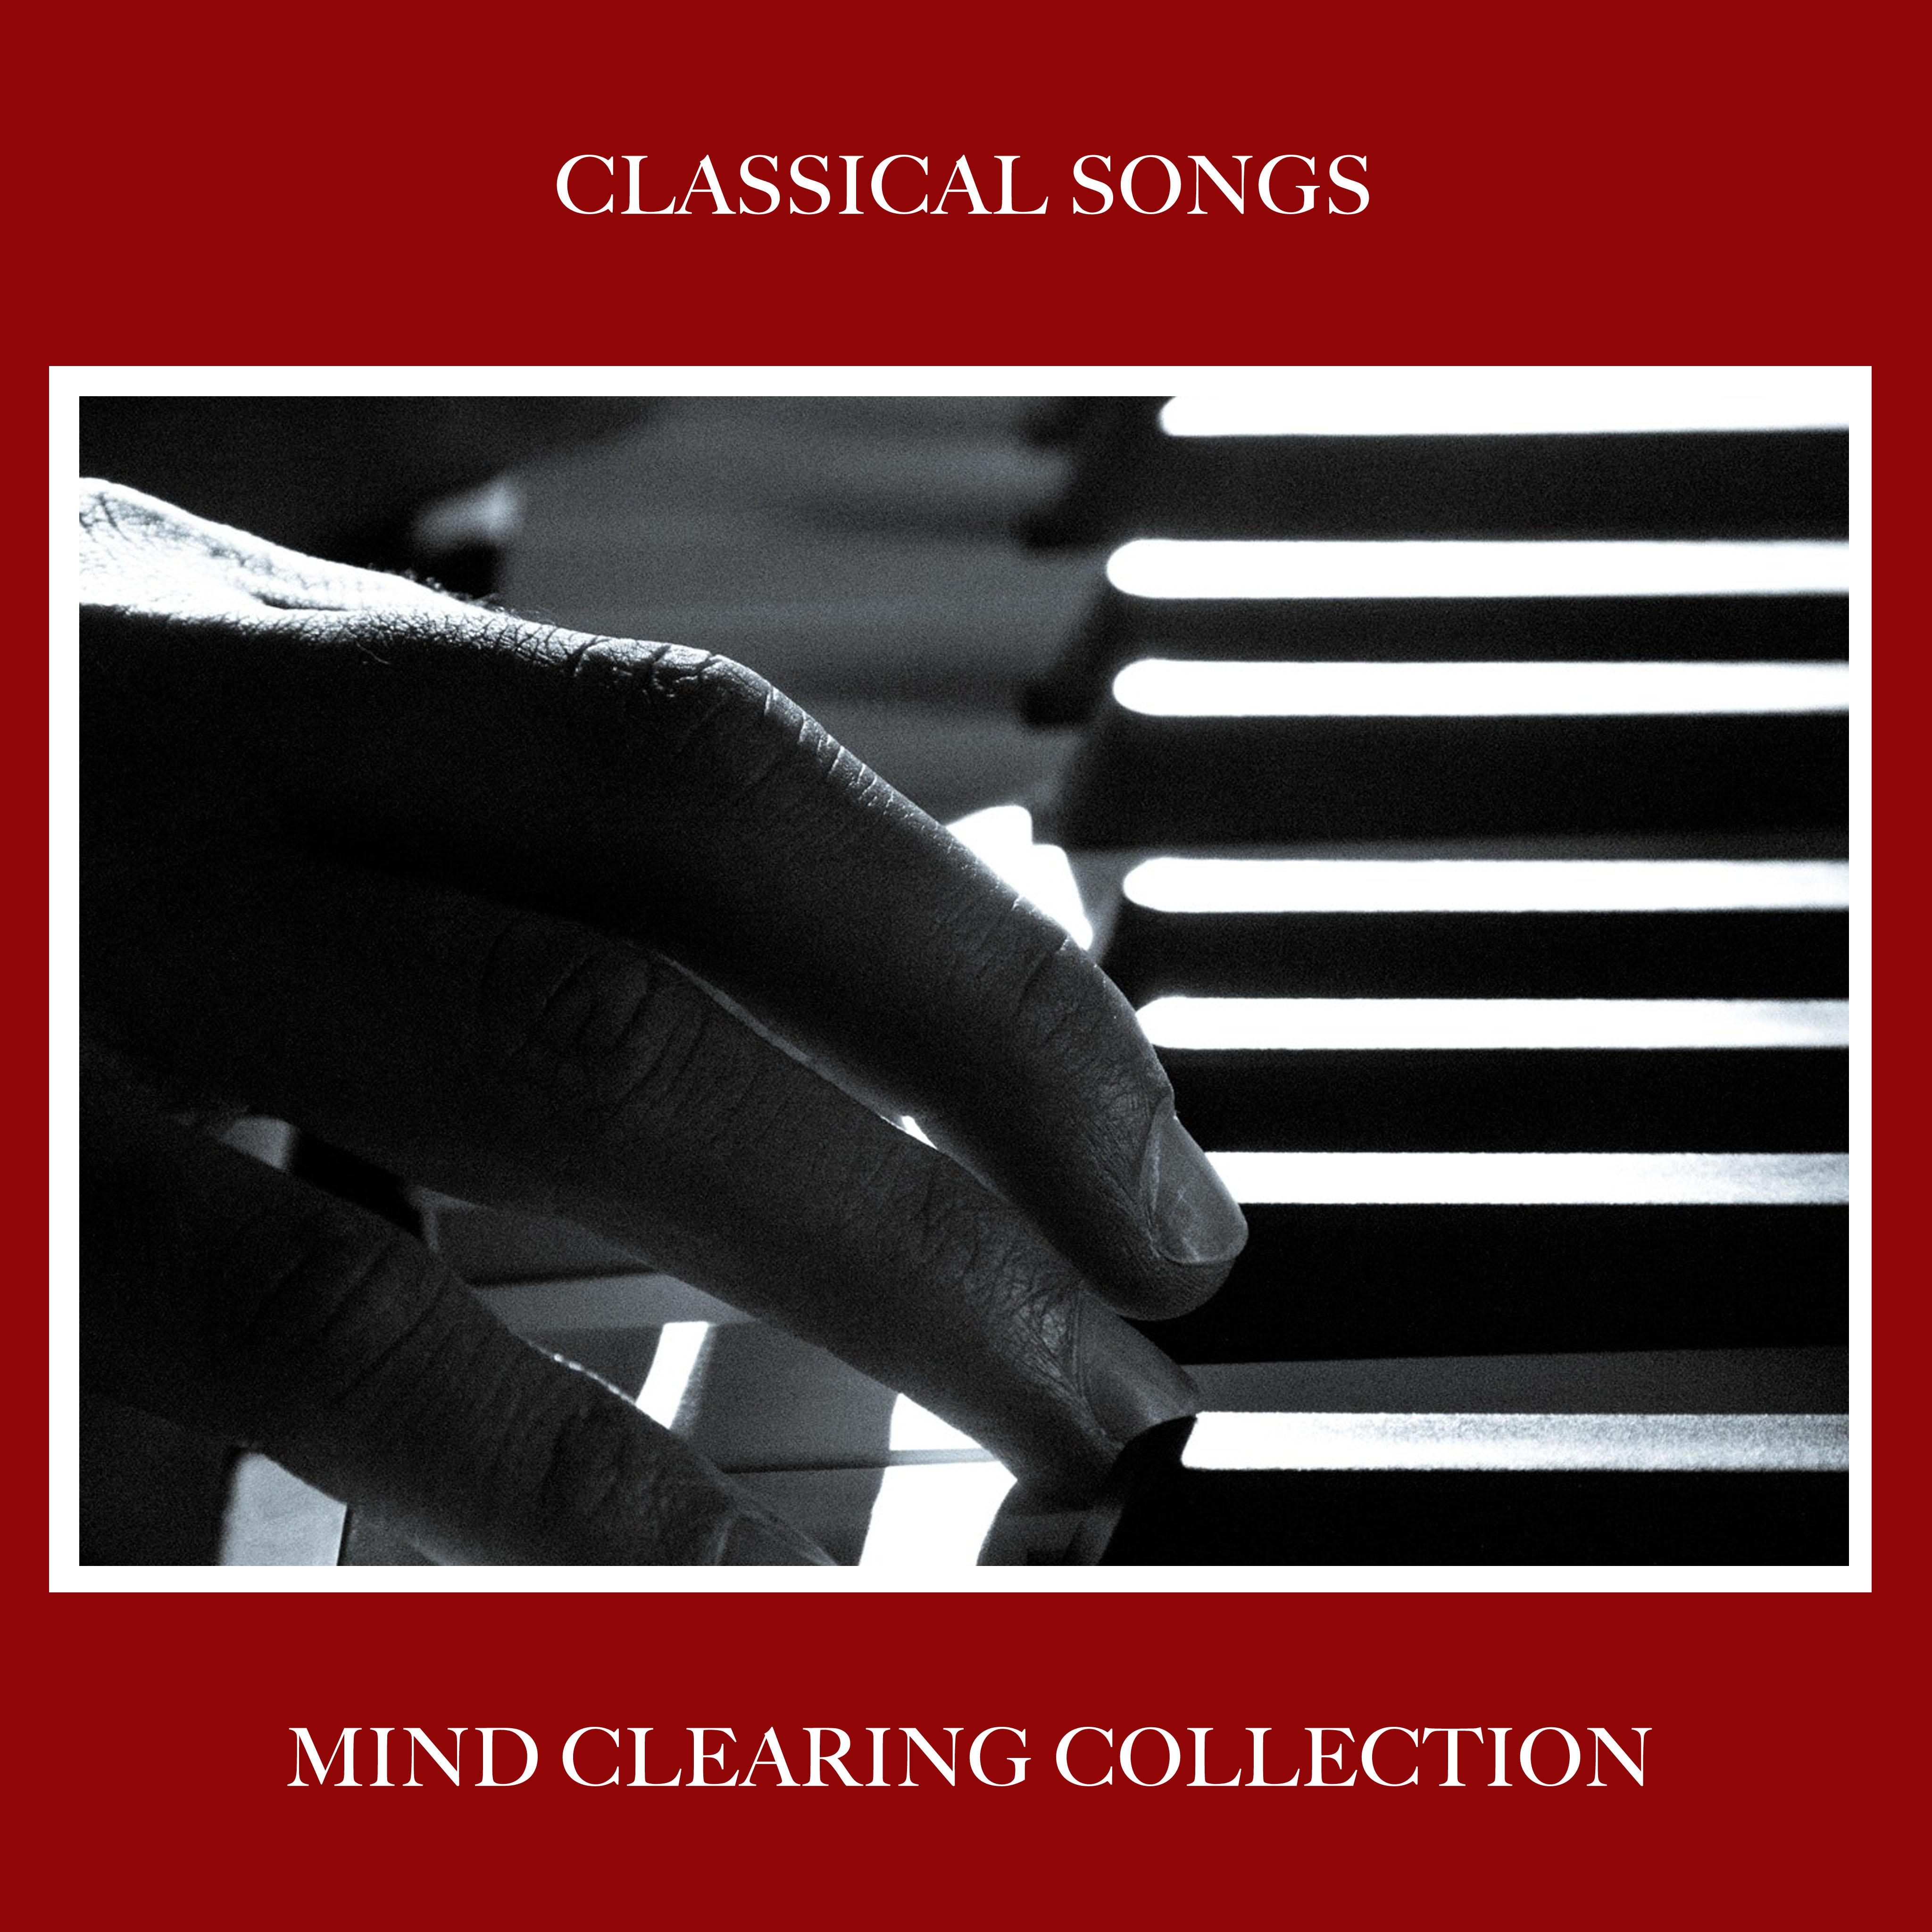 11 Mind Clearing Classical Song Collection